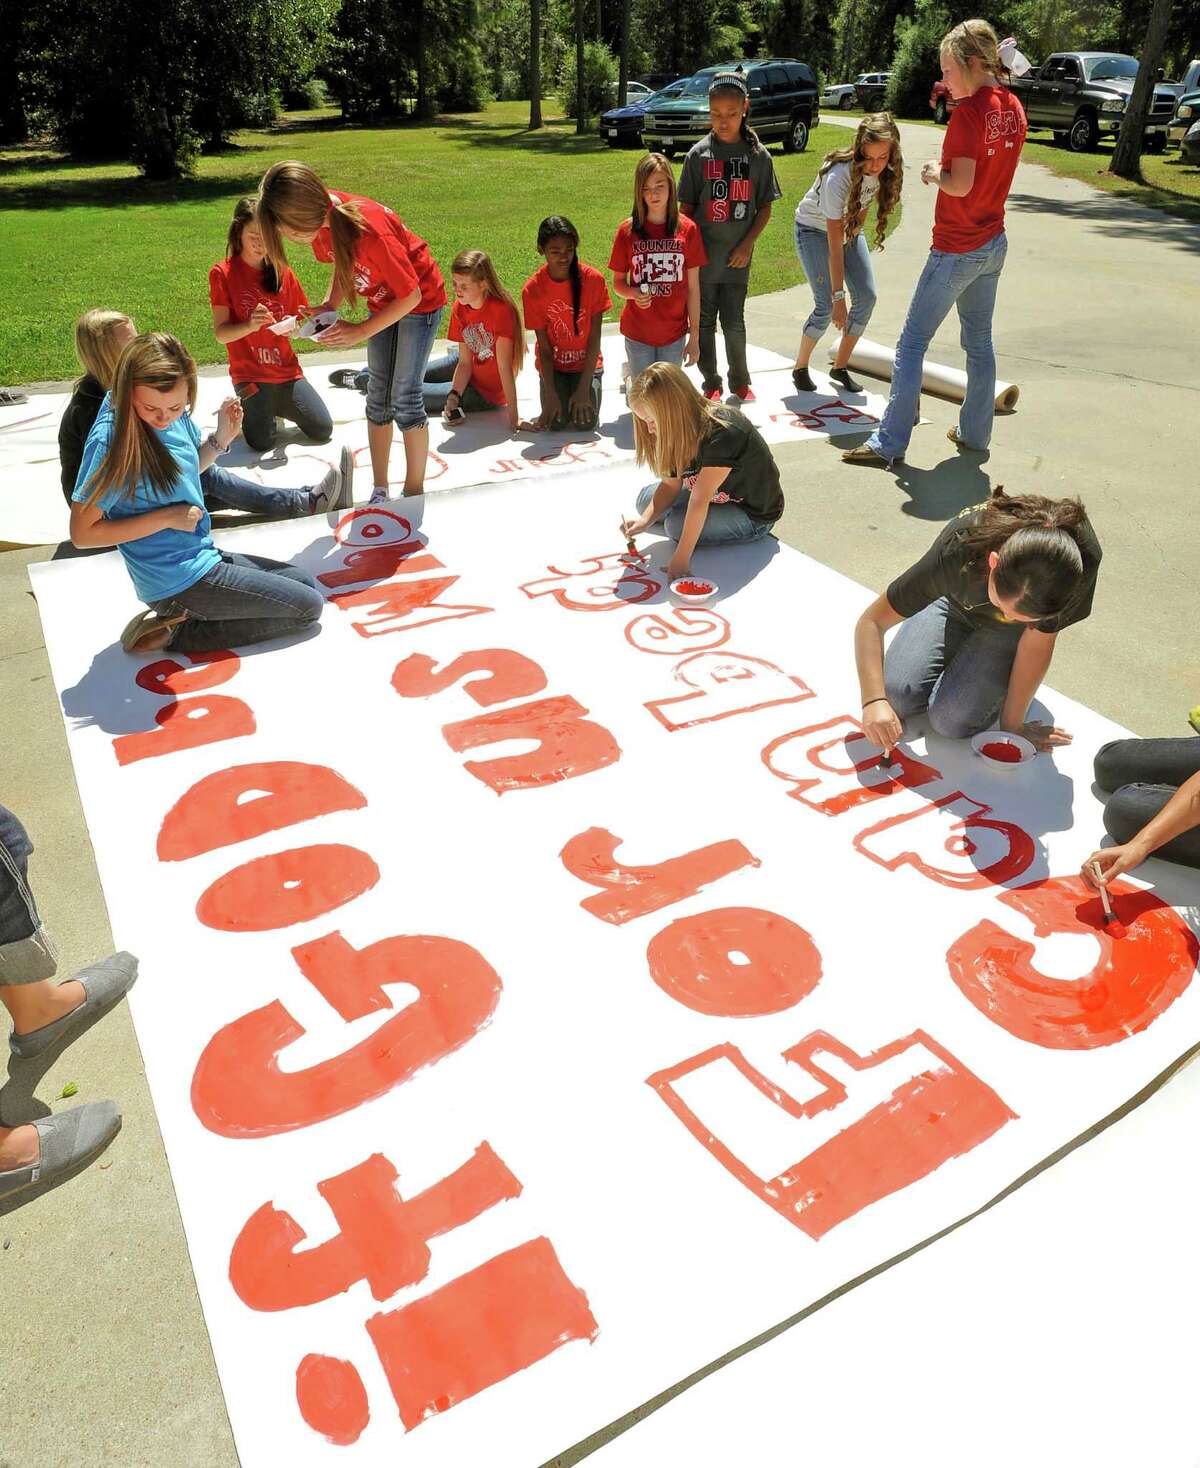 Kountze High School cheerleaders and other children work on a large sign Wednesday, Sept. 19, 2012 in Kountze, Texas. The small Hardin County community is rallying behind the high school's cheerleaders after the squad members were told they could not use scripture verses on their signs at the football games. (AP Photo/The Beaumont Enterprise, Dave Ryan)